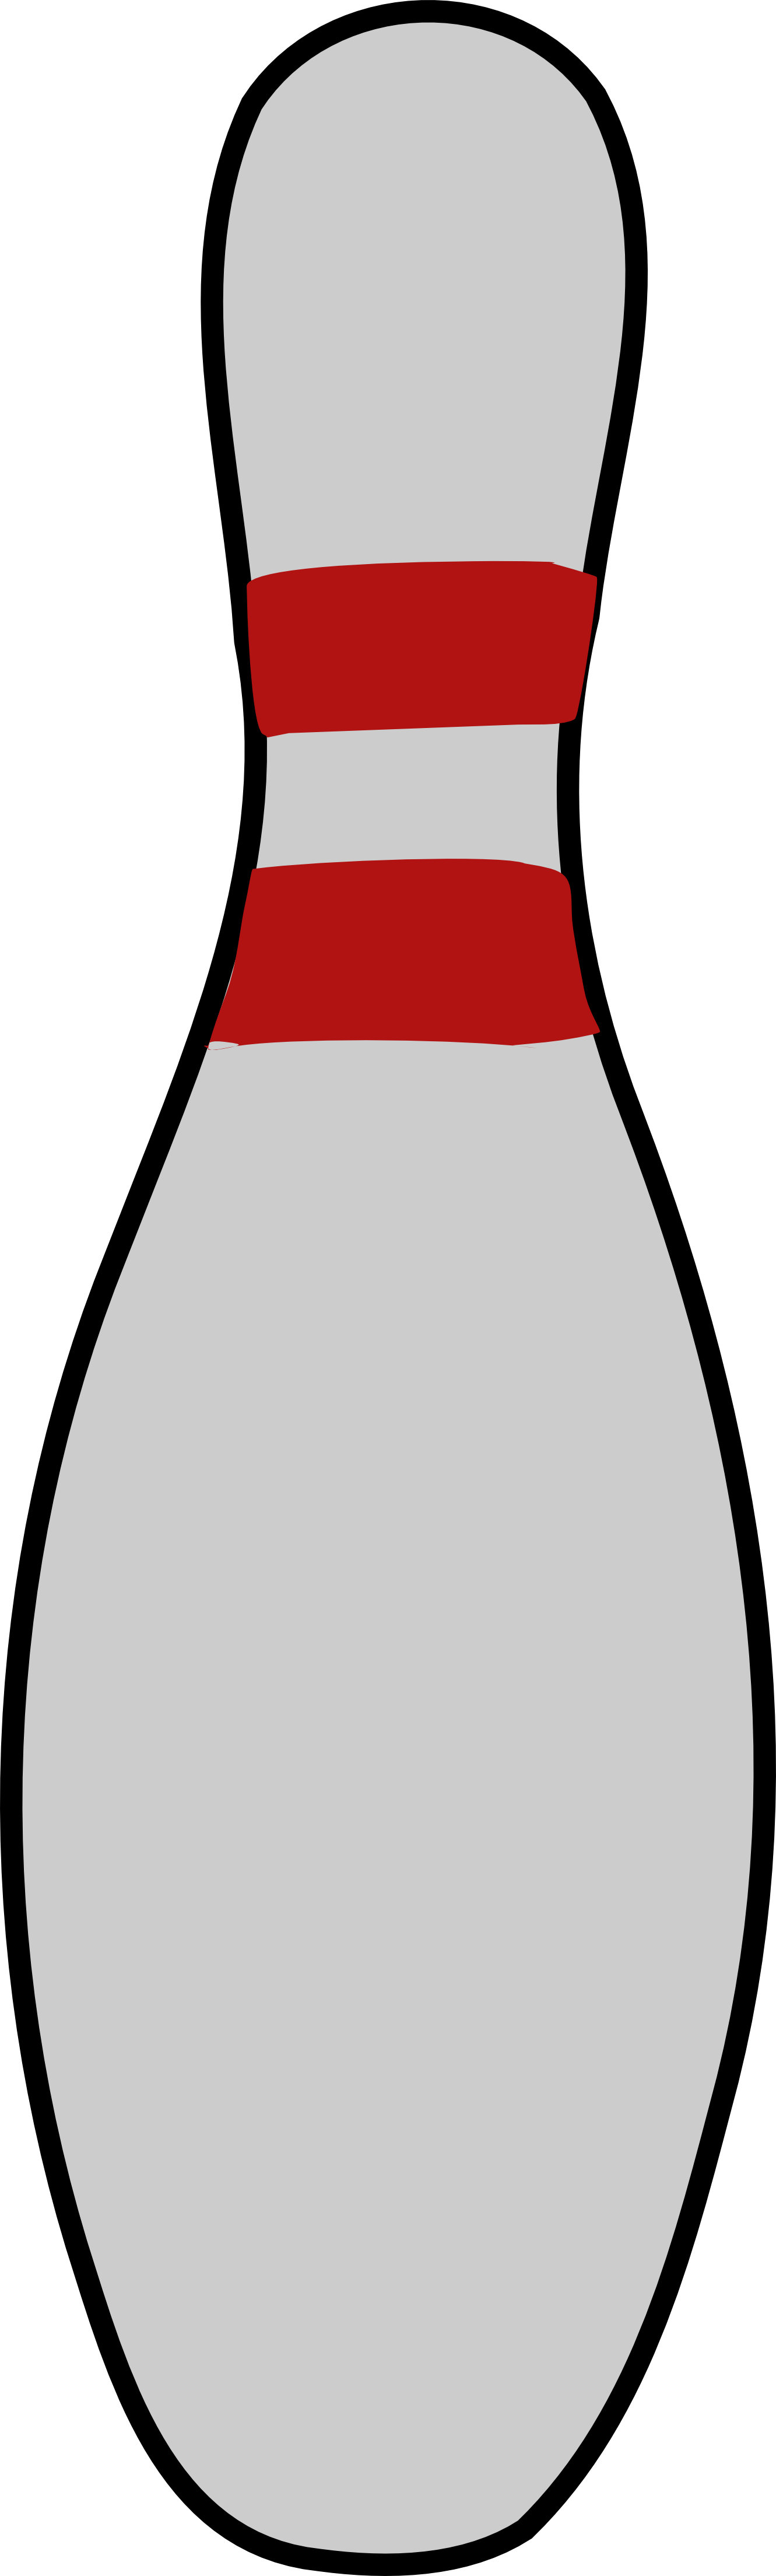 Picture Of Bowling Pin | Free Download Clip Art | Free Clip Art ...